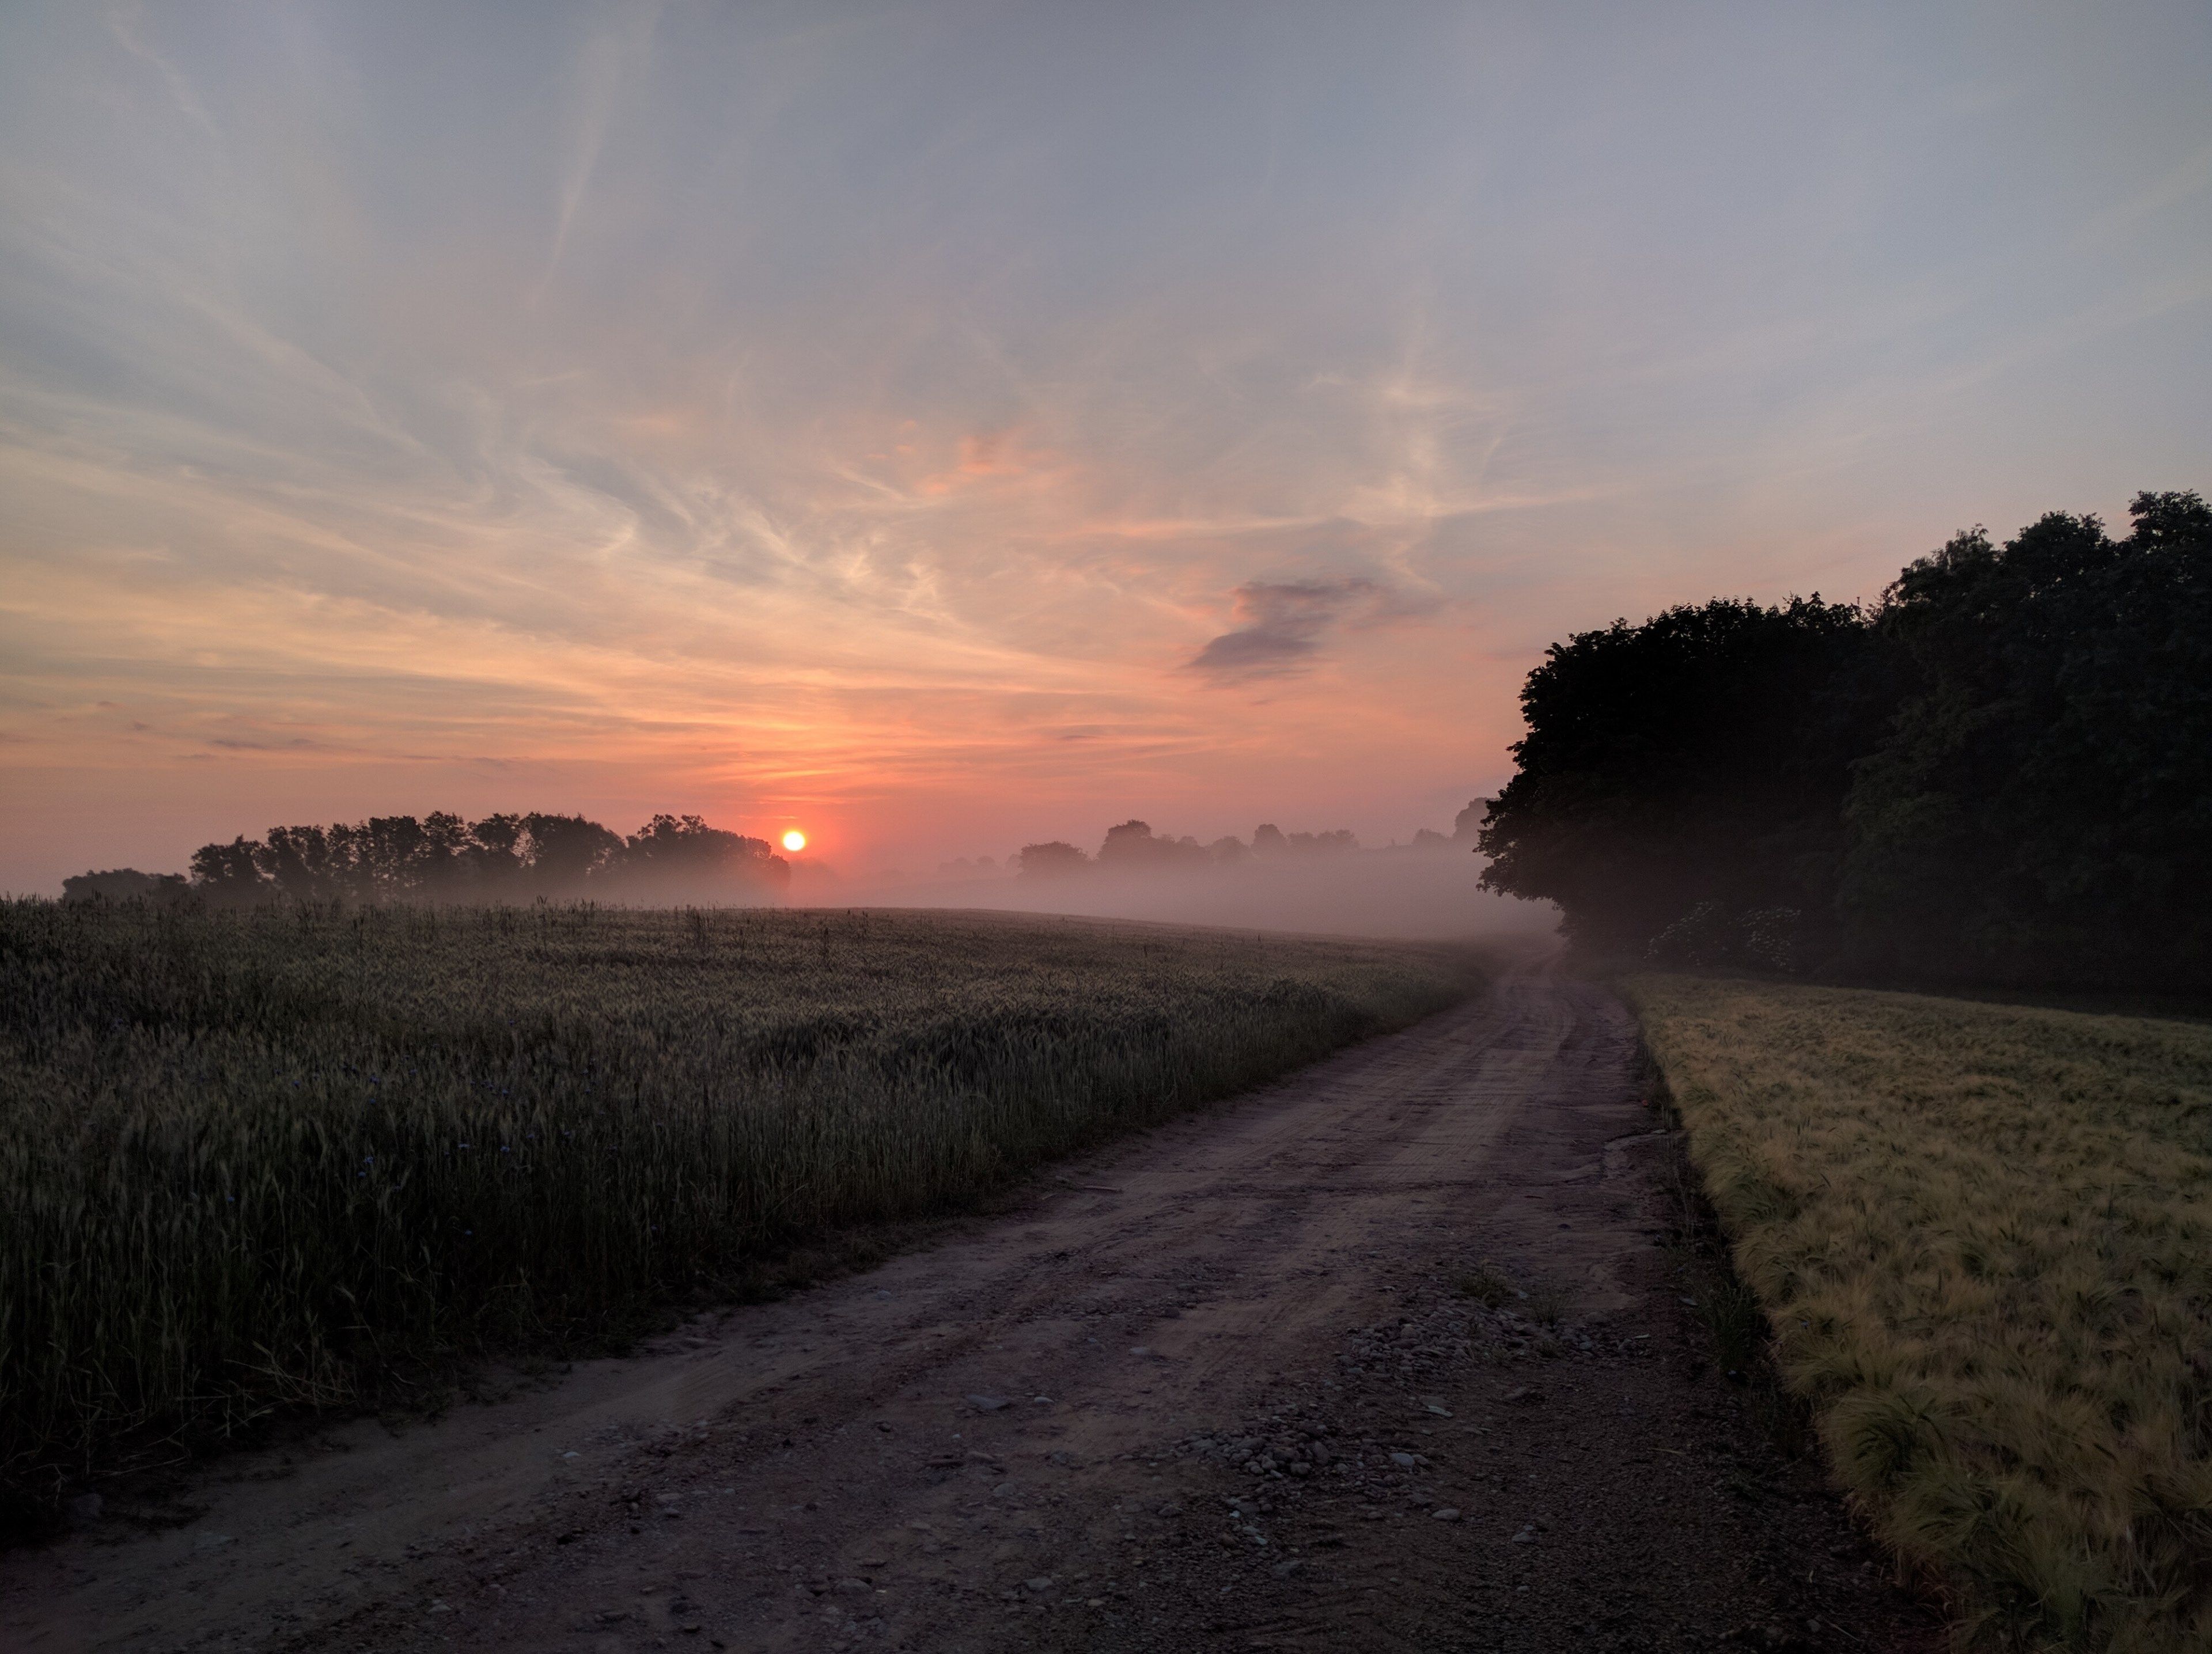 Wallpaper / country road in poland on a foggy peaceful morning, sunrises in the country 4k wallpaper